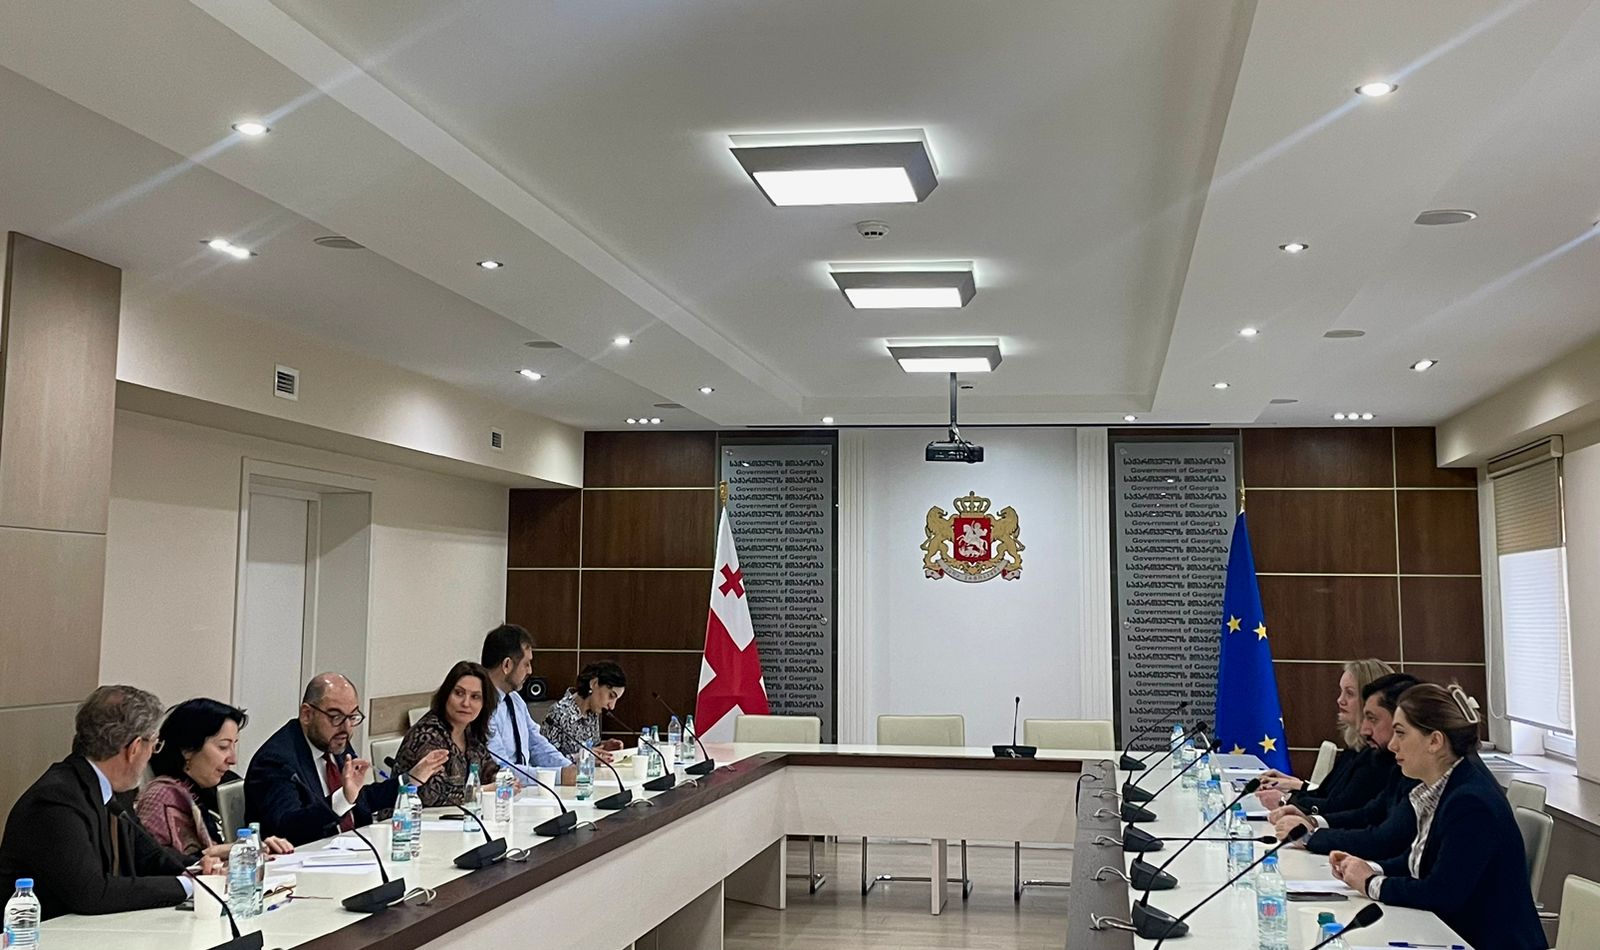 Razhden Kuprashvili, the Head of the Anti-Corruption Bureau, met with delegates from the European Union (EU) Commission Directorate-General for Neighbourhood and Enlargement Negotiations (DG NEAR)